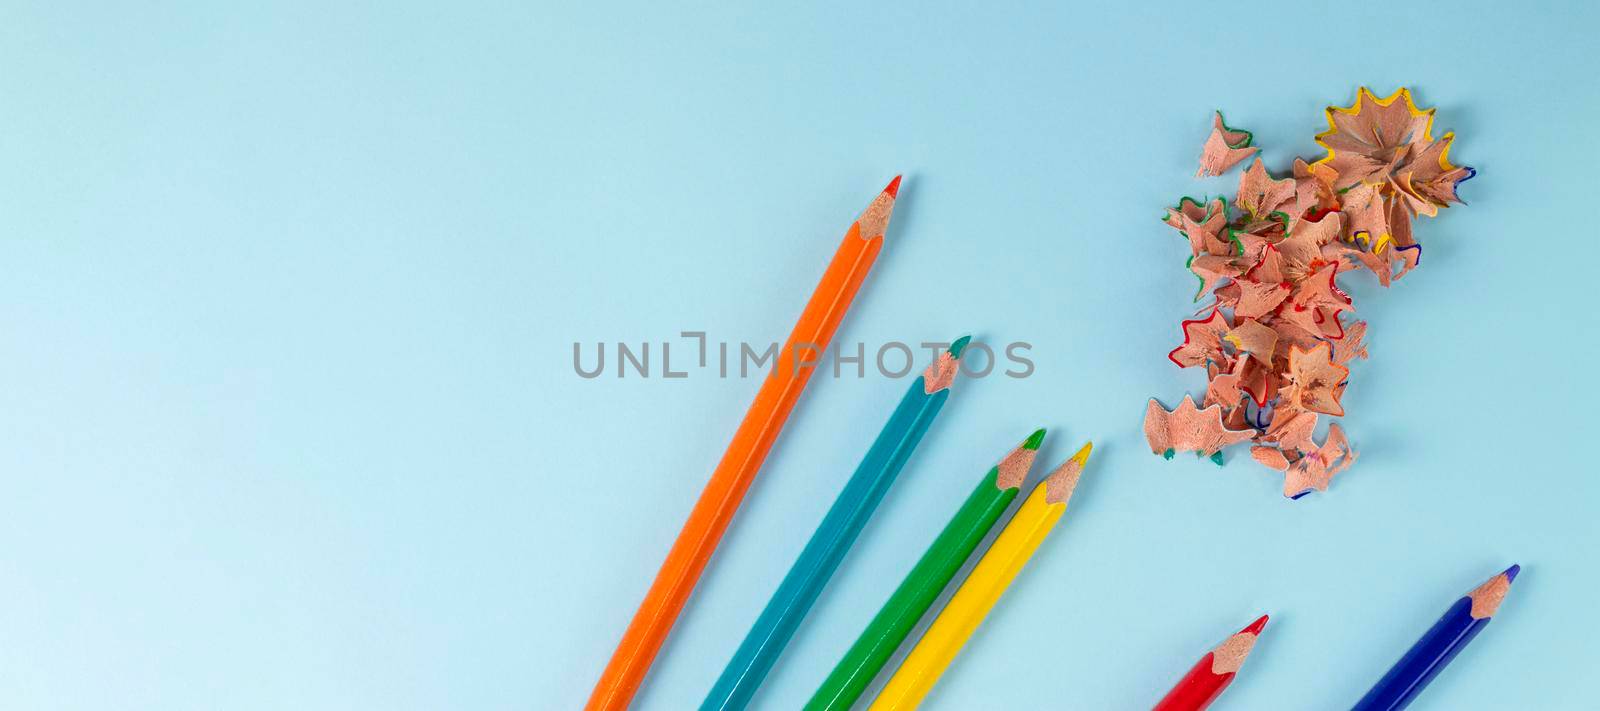 banner with Sharpened colored pencils and pencil shavings on pastel blue color. Rainbow or LGBT pencils. by Leoschka